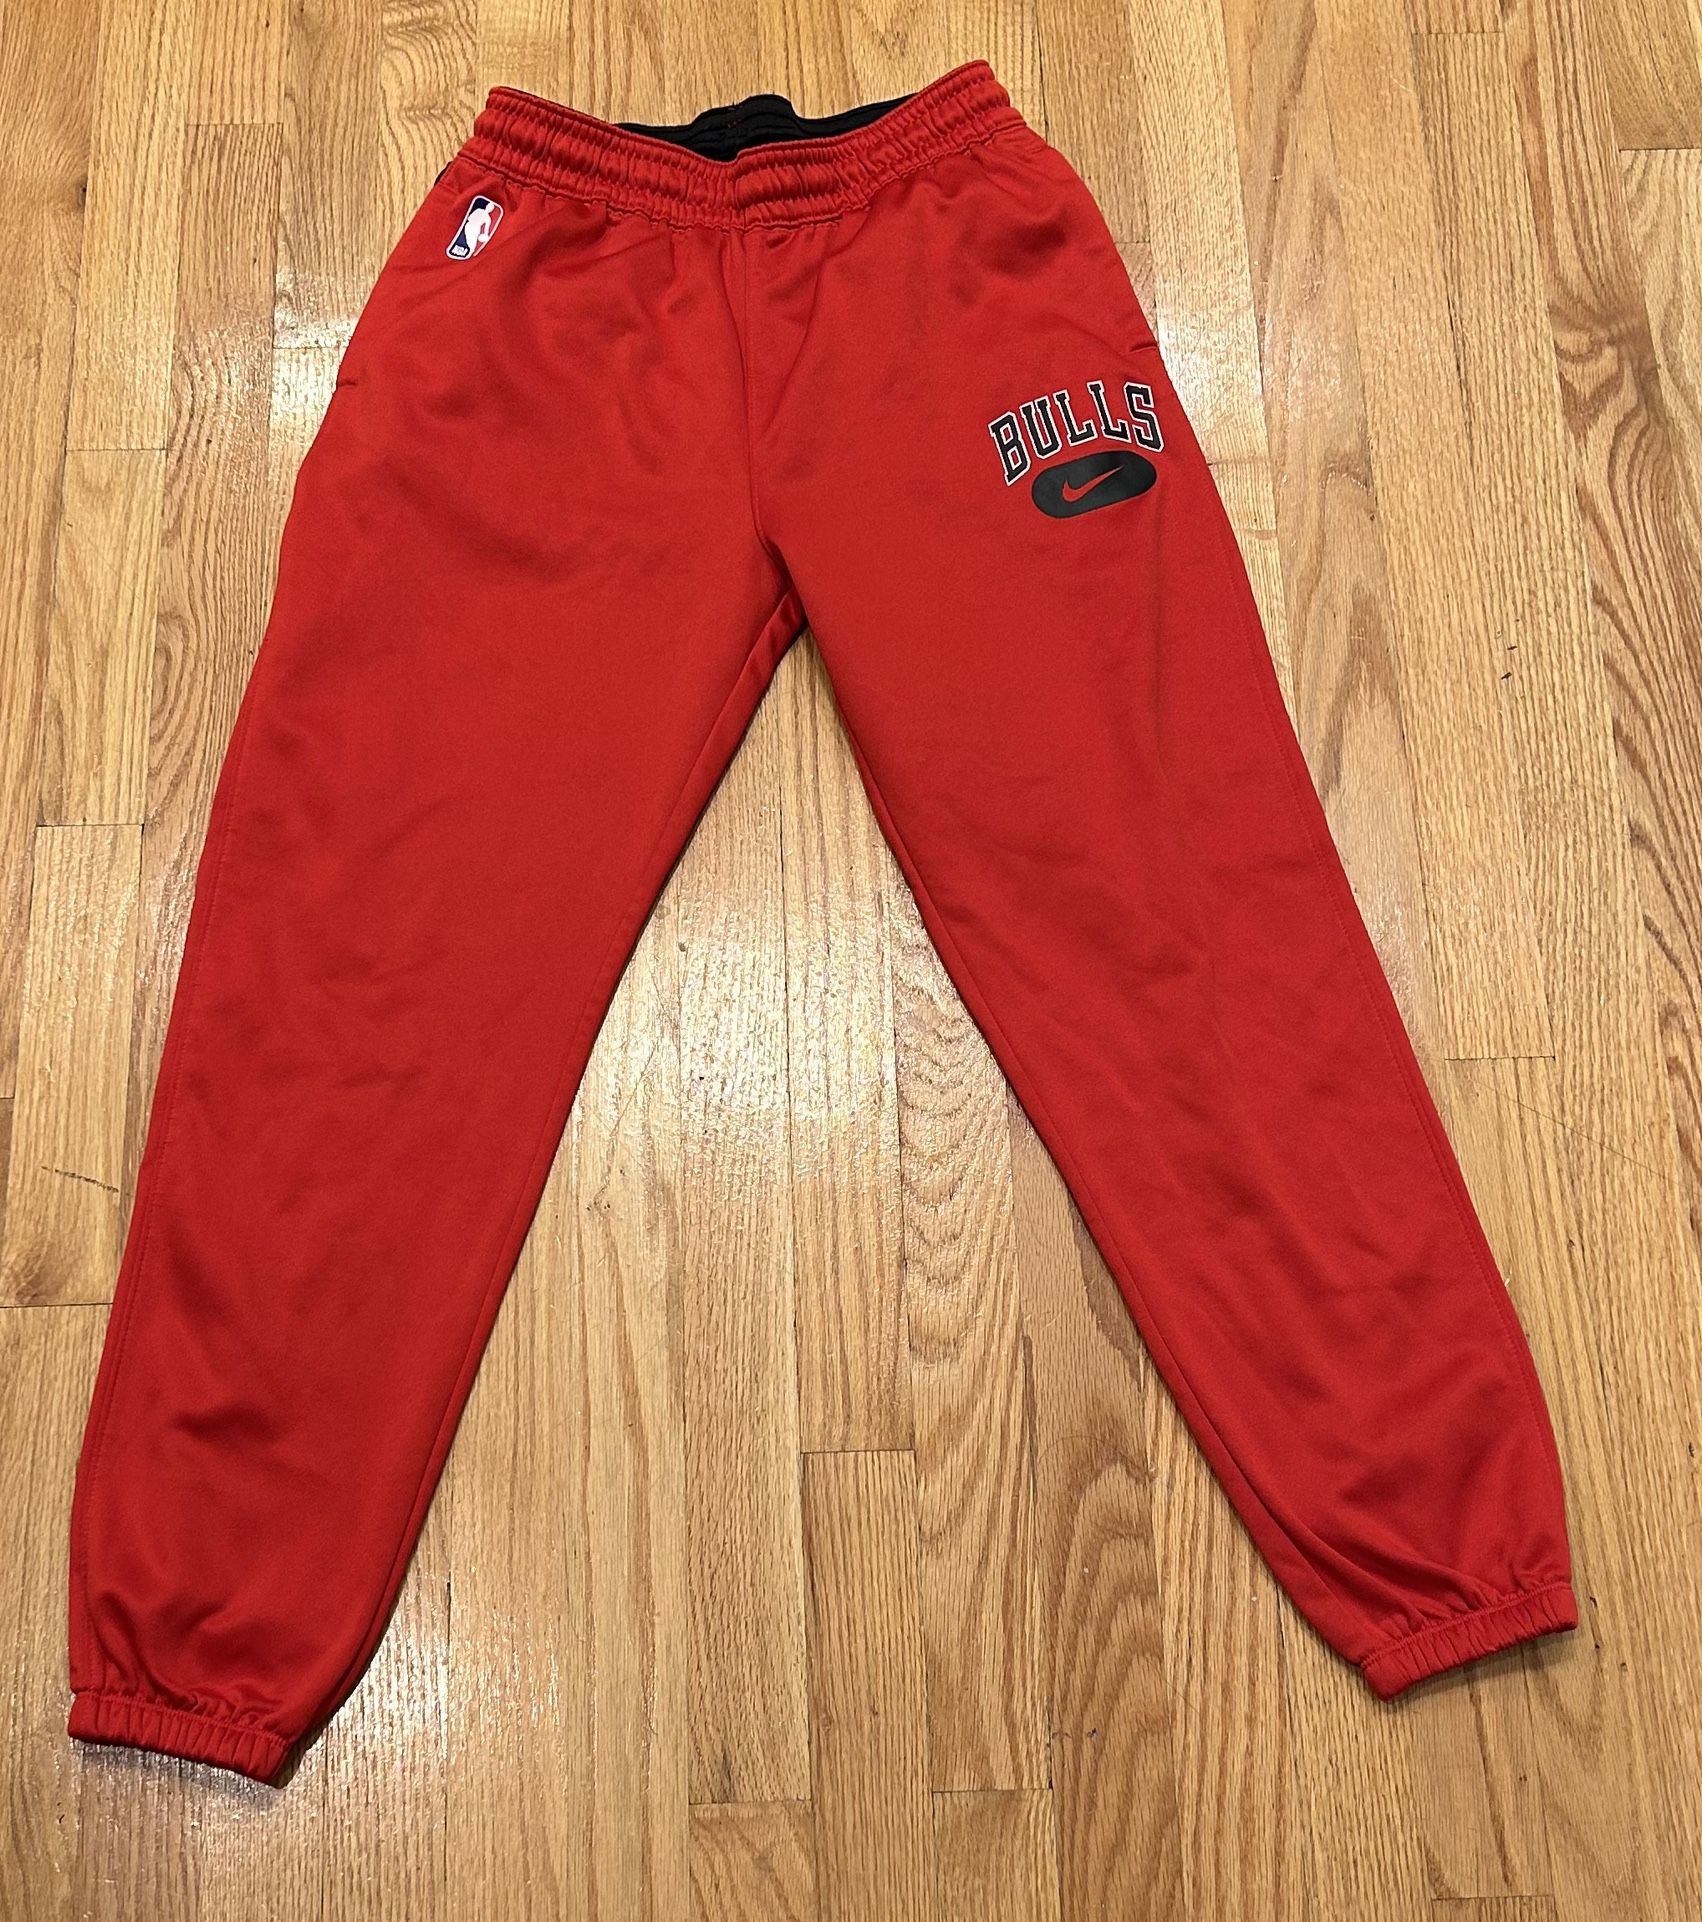 Boys Nike Dri-Fit Chicago Bulls Sweatpants for Sale in Chicago, IL - OfferUp